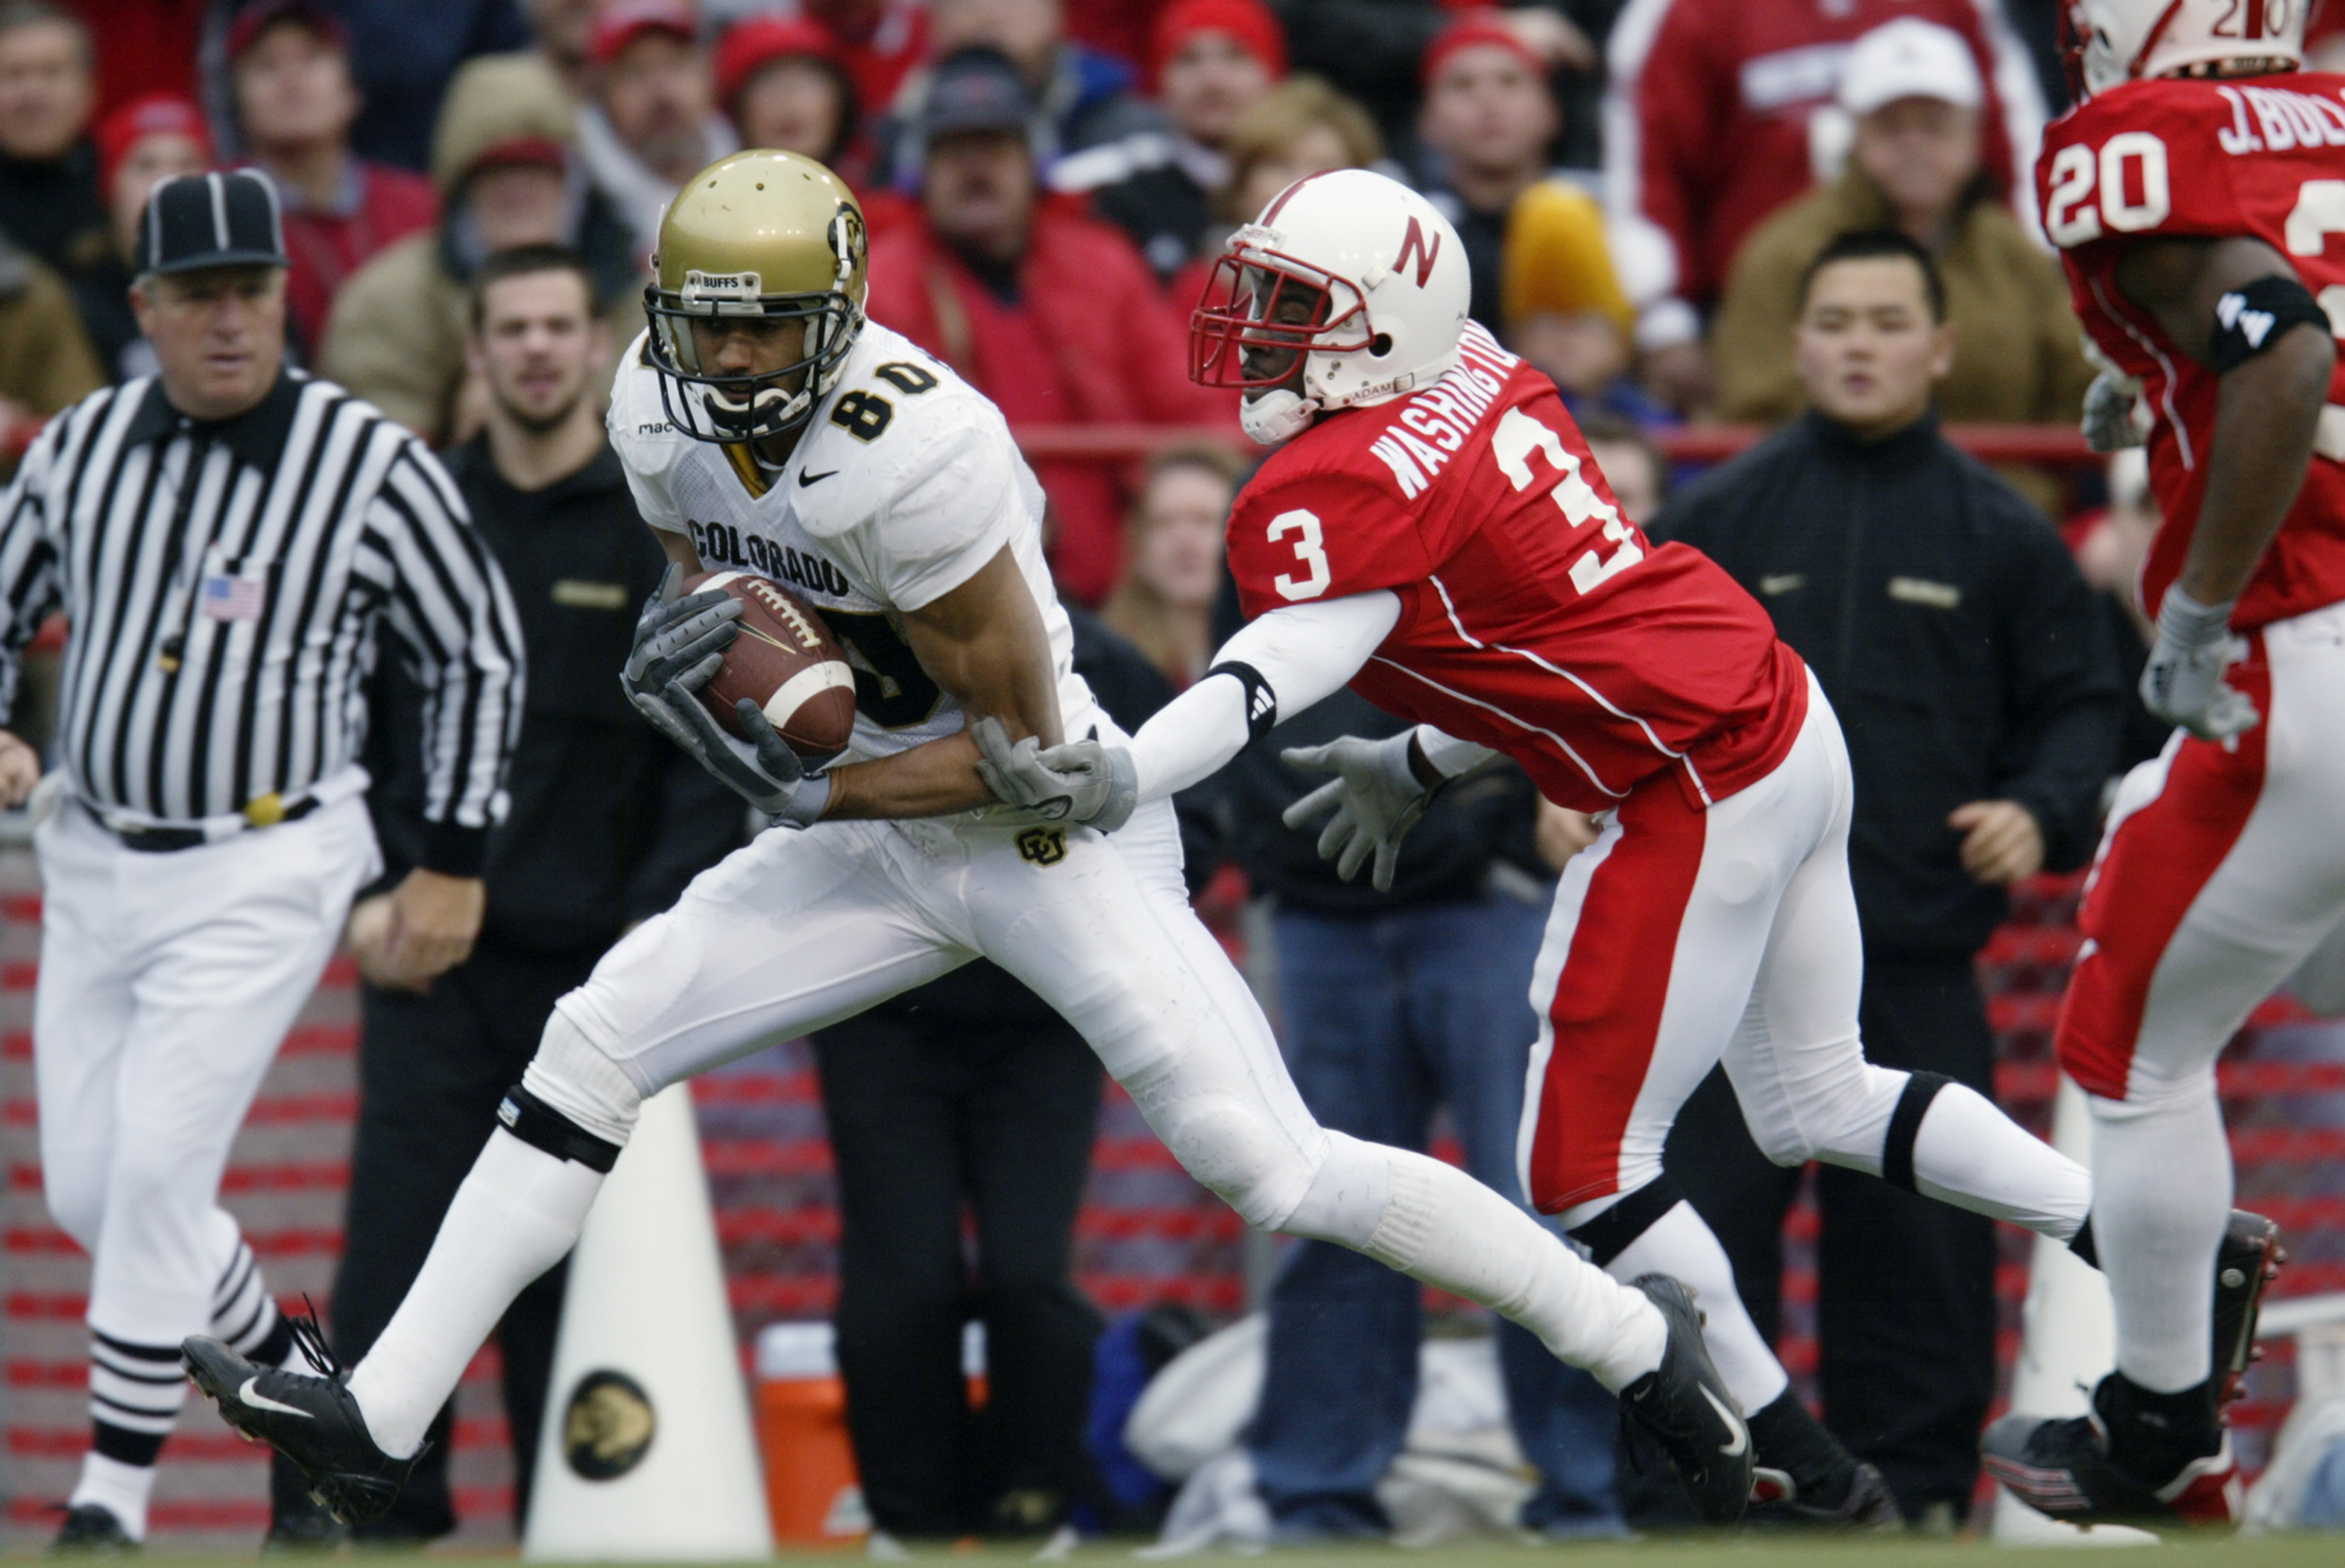 LINCOLN, NE - NOVEMBER 29:  Wide receiver Derek McCoy #80 of the University of Colorado Buffaloes pulls down a 40-yard touchdown pass against cornerback Fabian Washington #3 of the University of Nebraska Cornhuskers in the first quarter of the NCAA game a